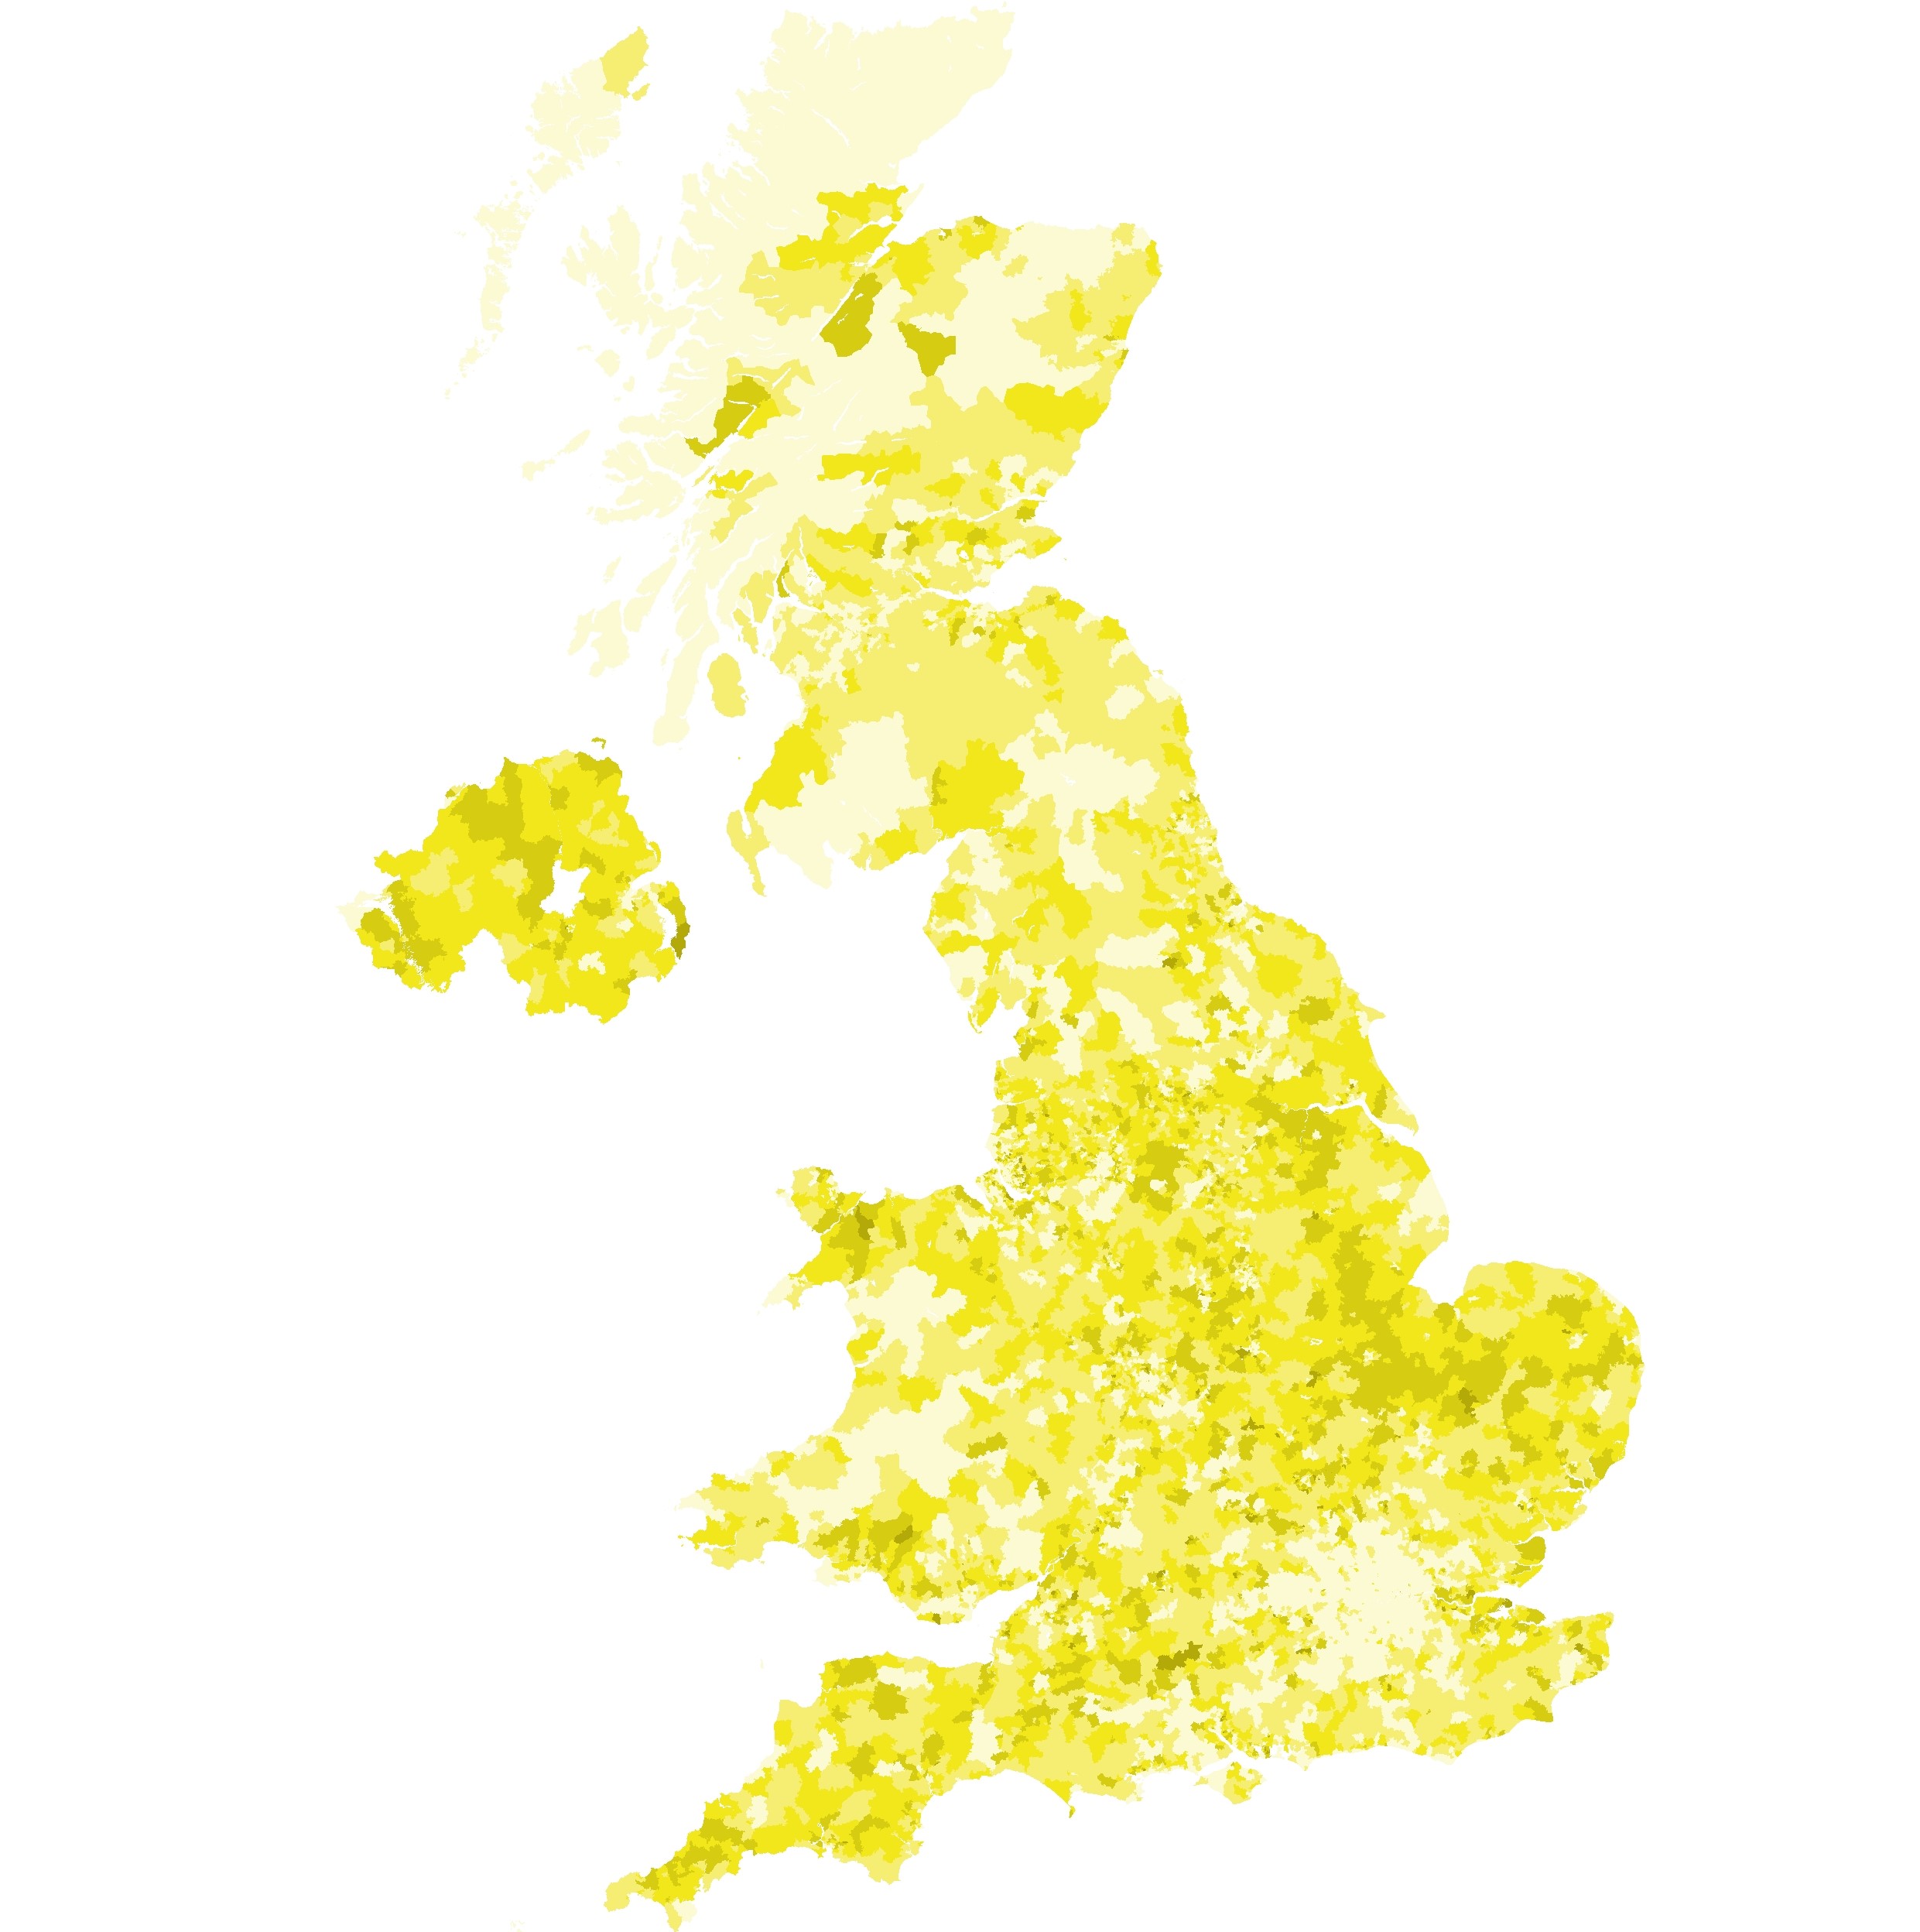 A heatmap of this segment's distribution shows mostly even distribution across the UK, with some gaps in big cities like London, dark and concentrated areas in the East of England and the north of Scotland.